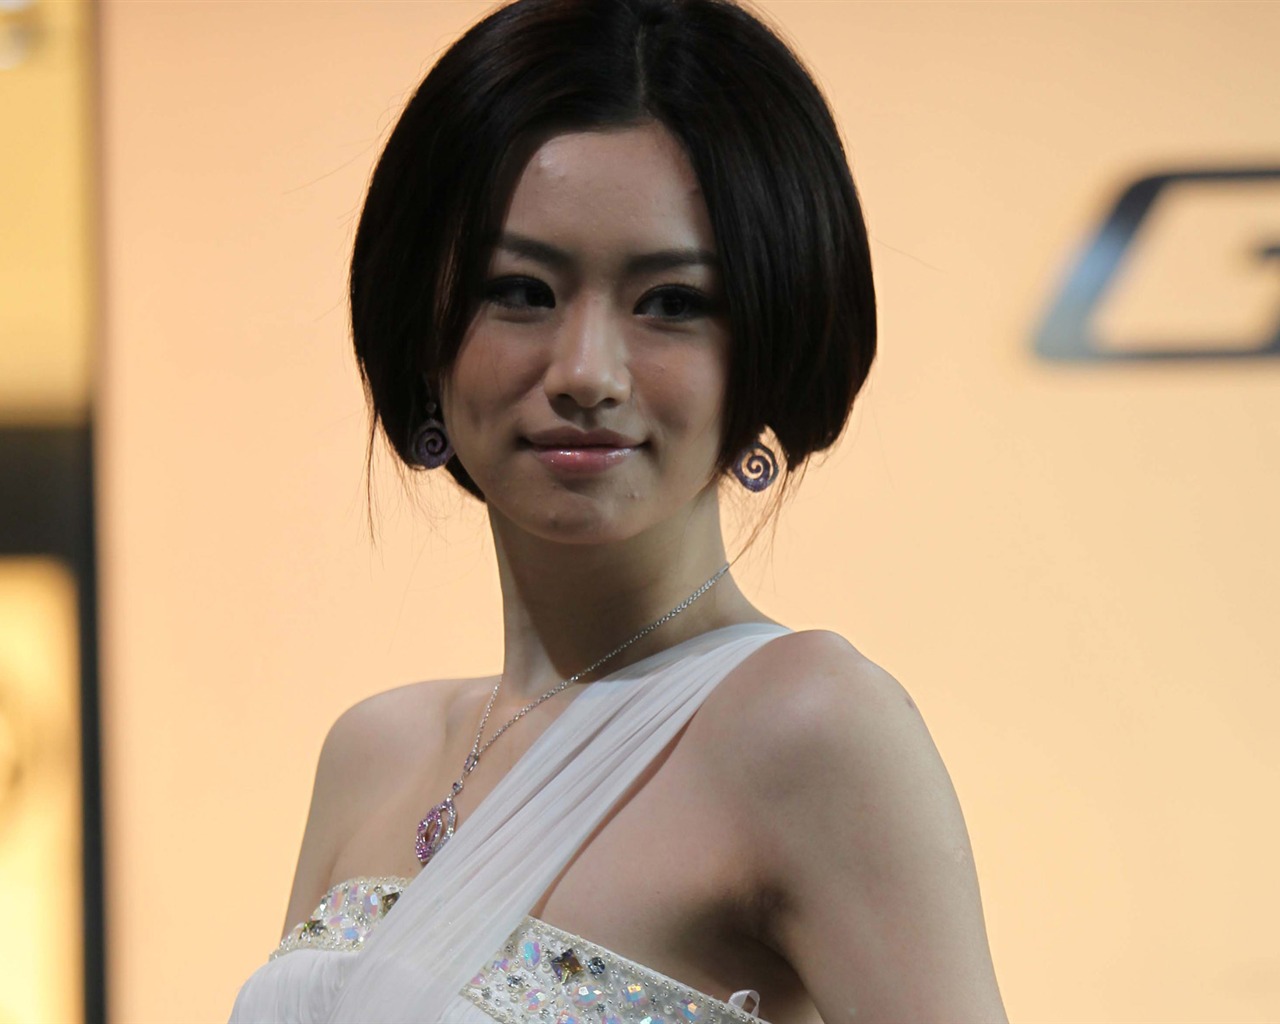 2010 Beijing International Auto Show beauty (1) (the wind chasing the clouds works) #23 - 1280x1024